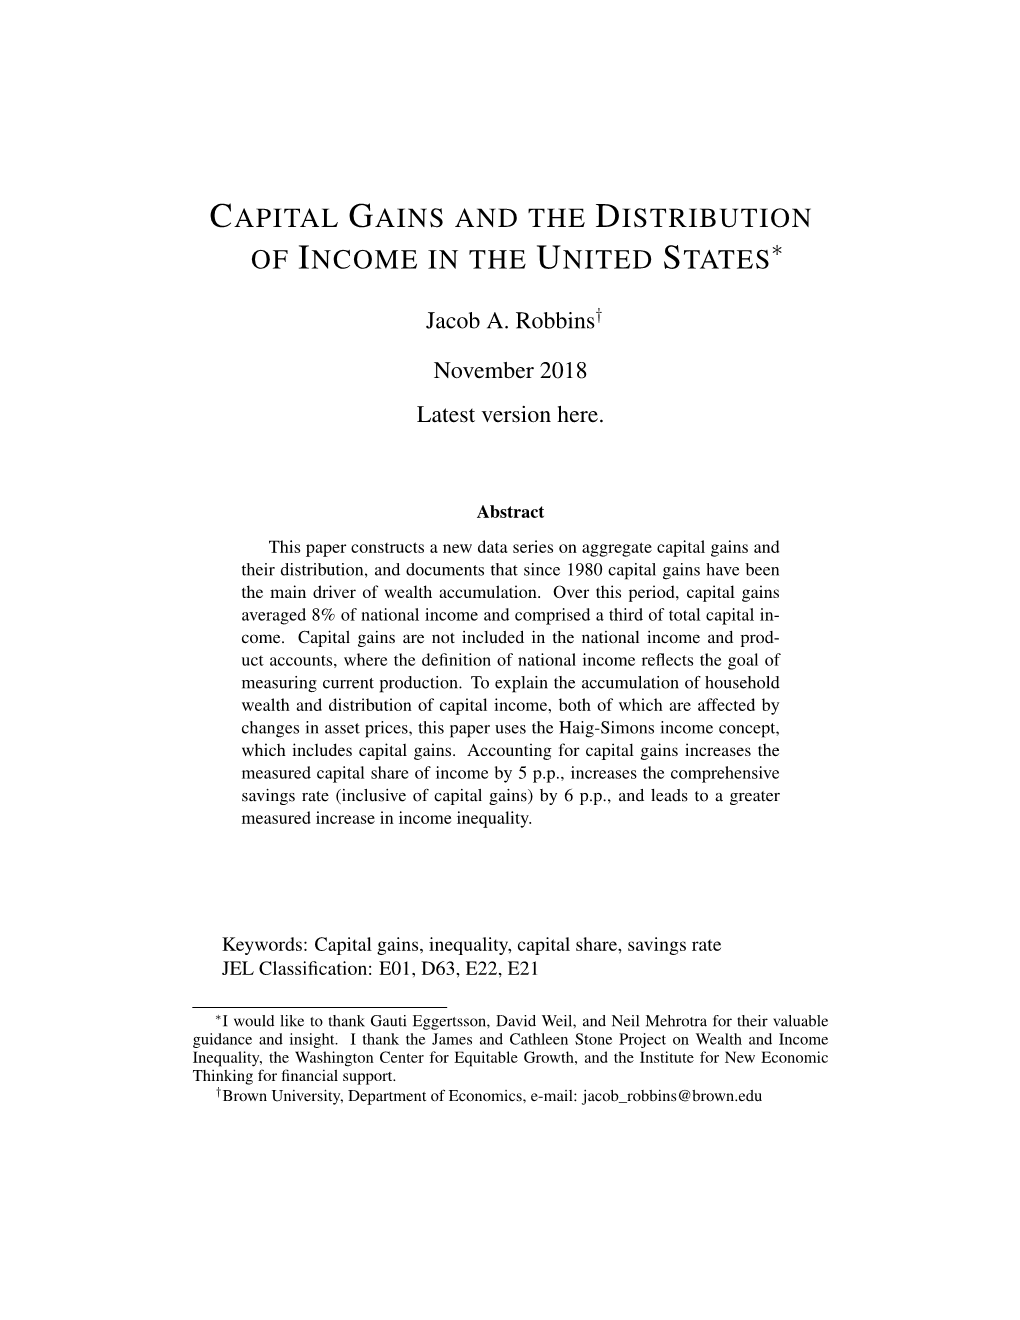 Capital Gains and the Distribution of Income In